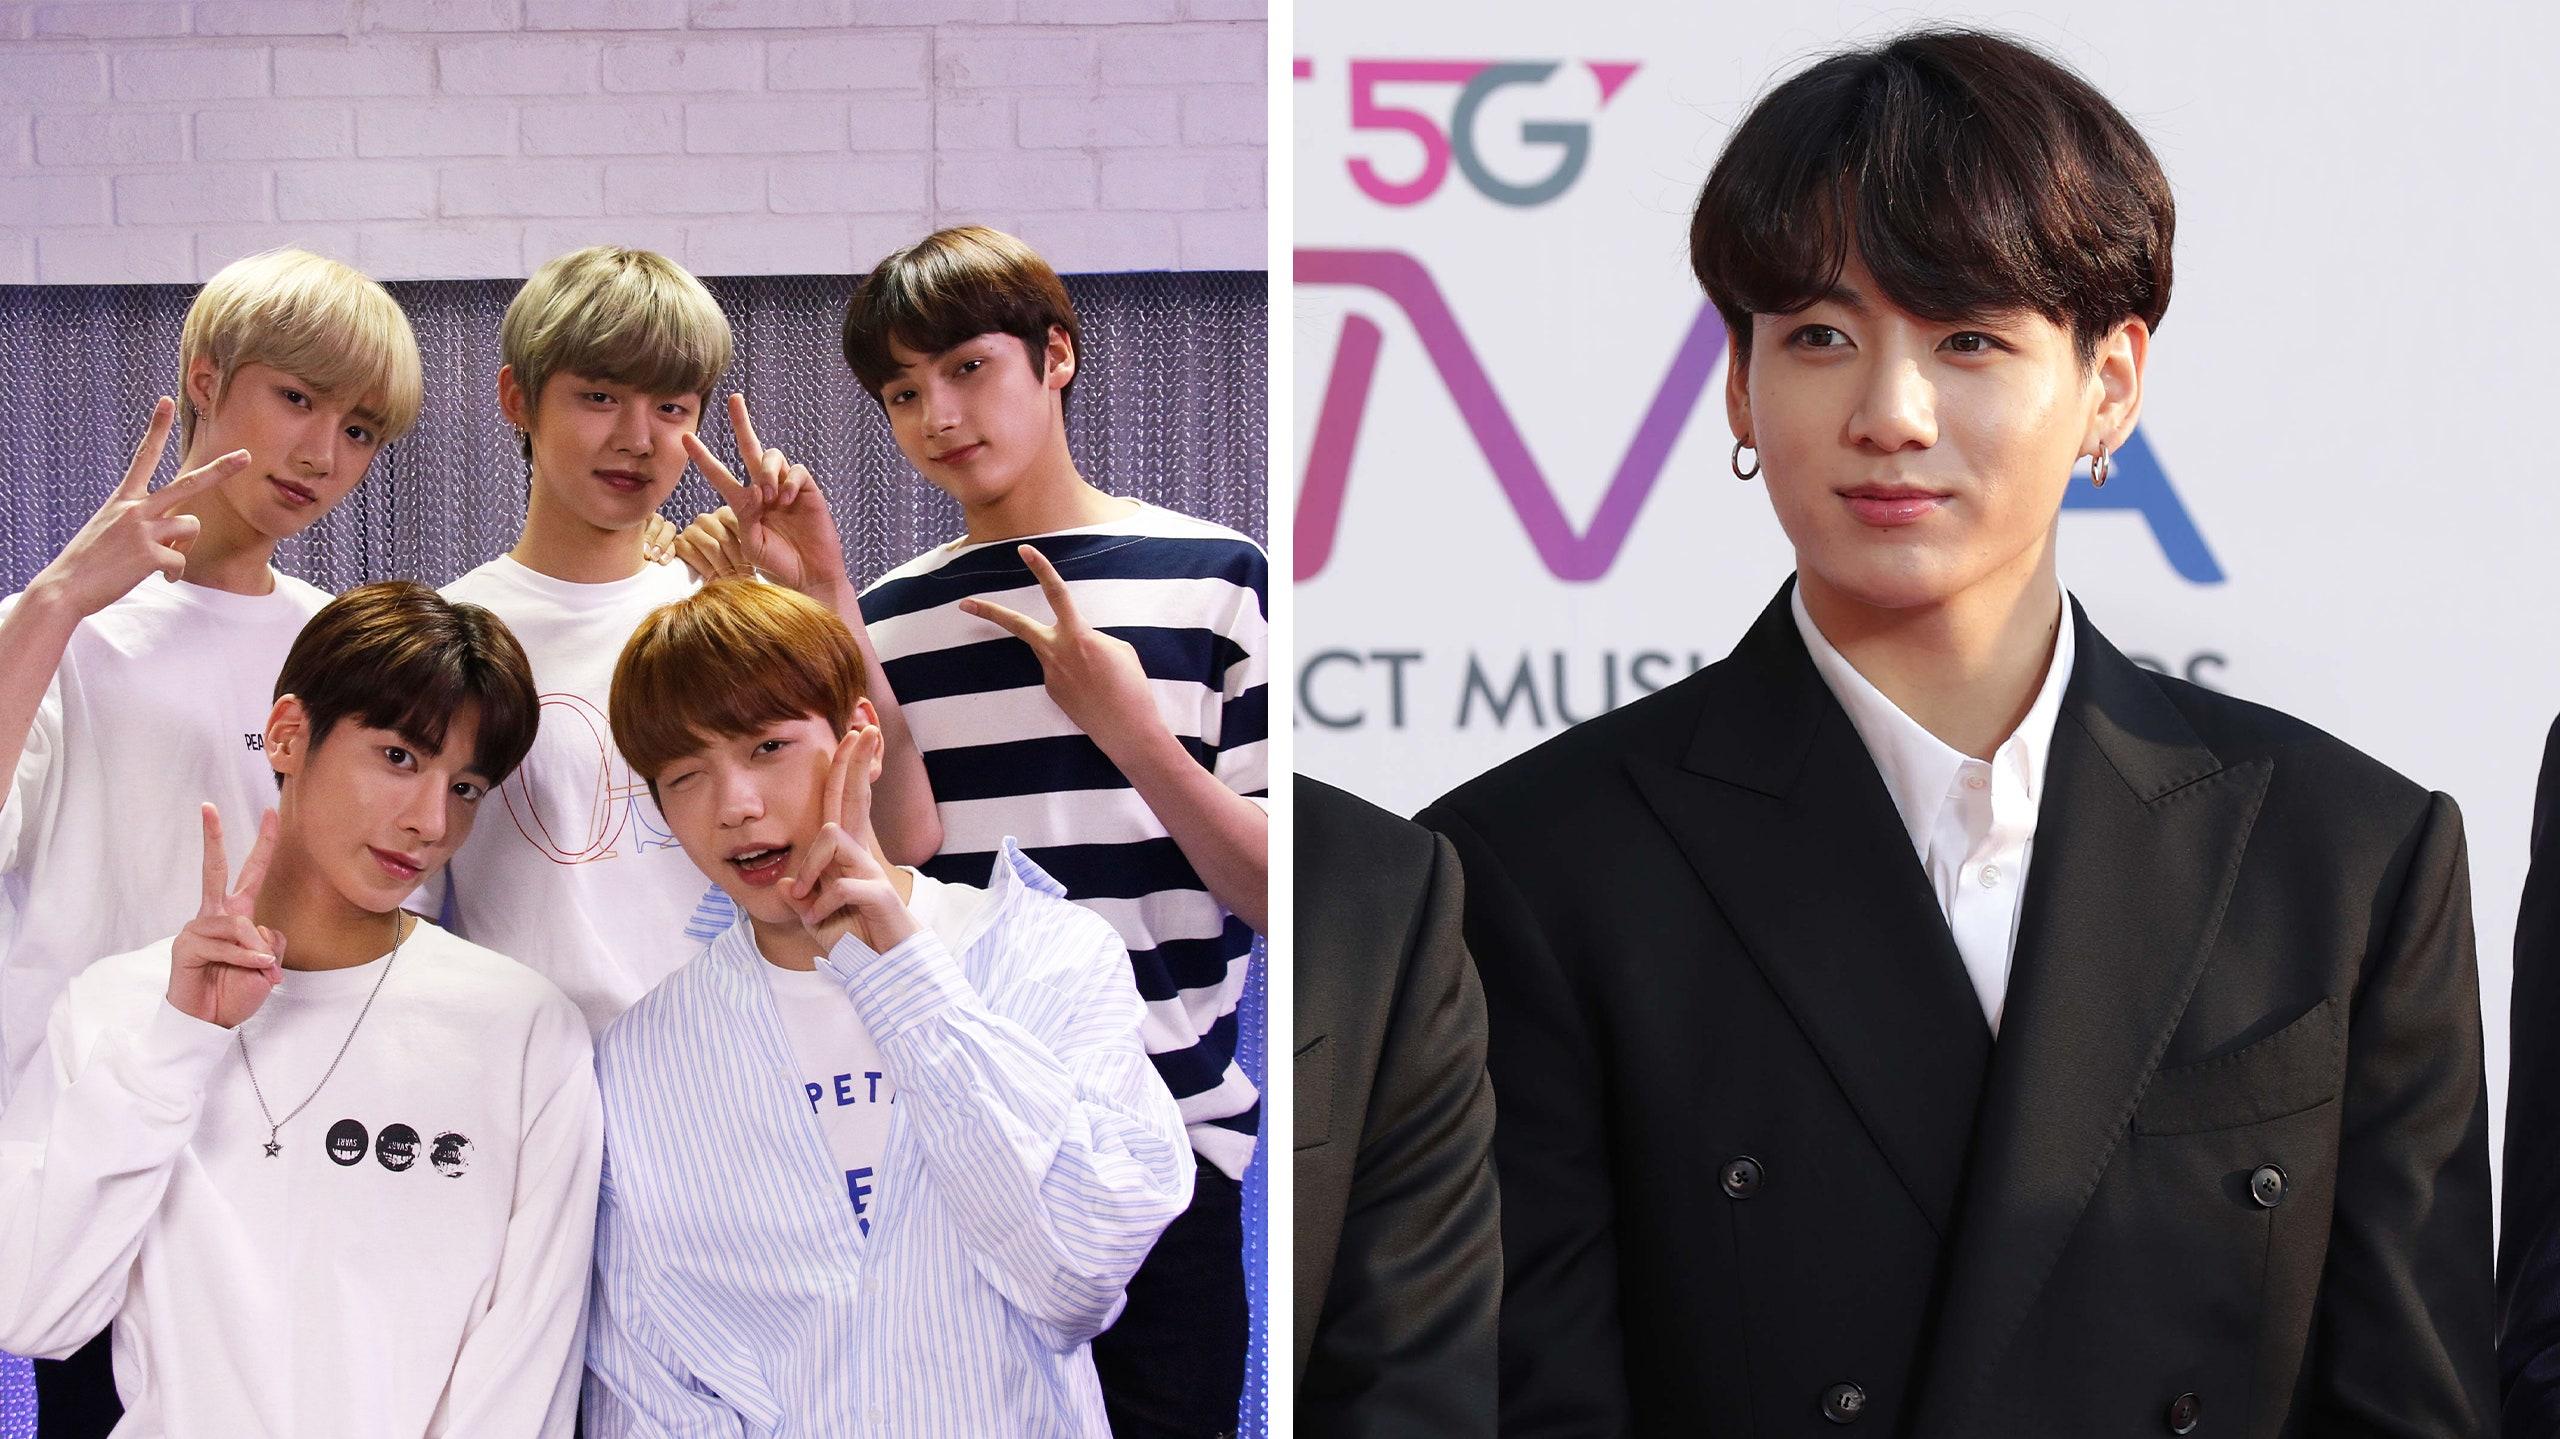 BTS Member Jungkook Wrote a Surprise Supportive Note to TXT Teen